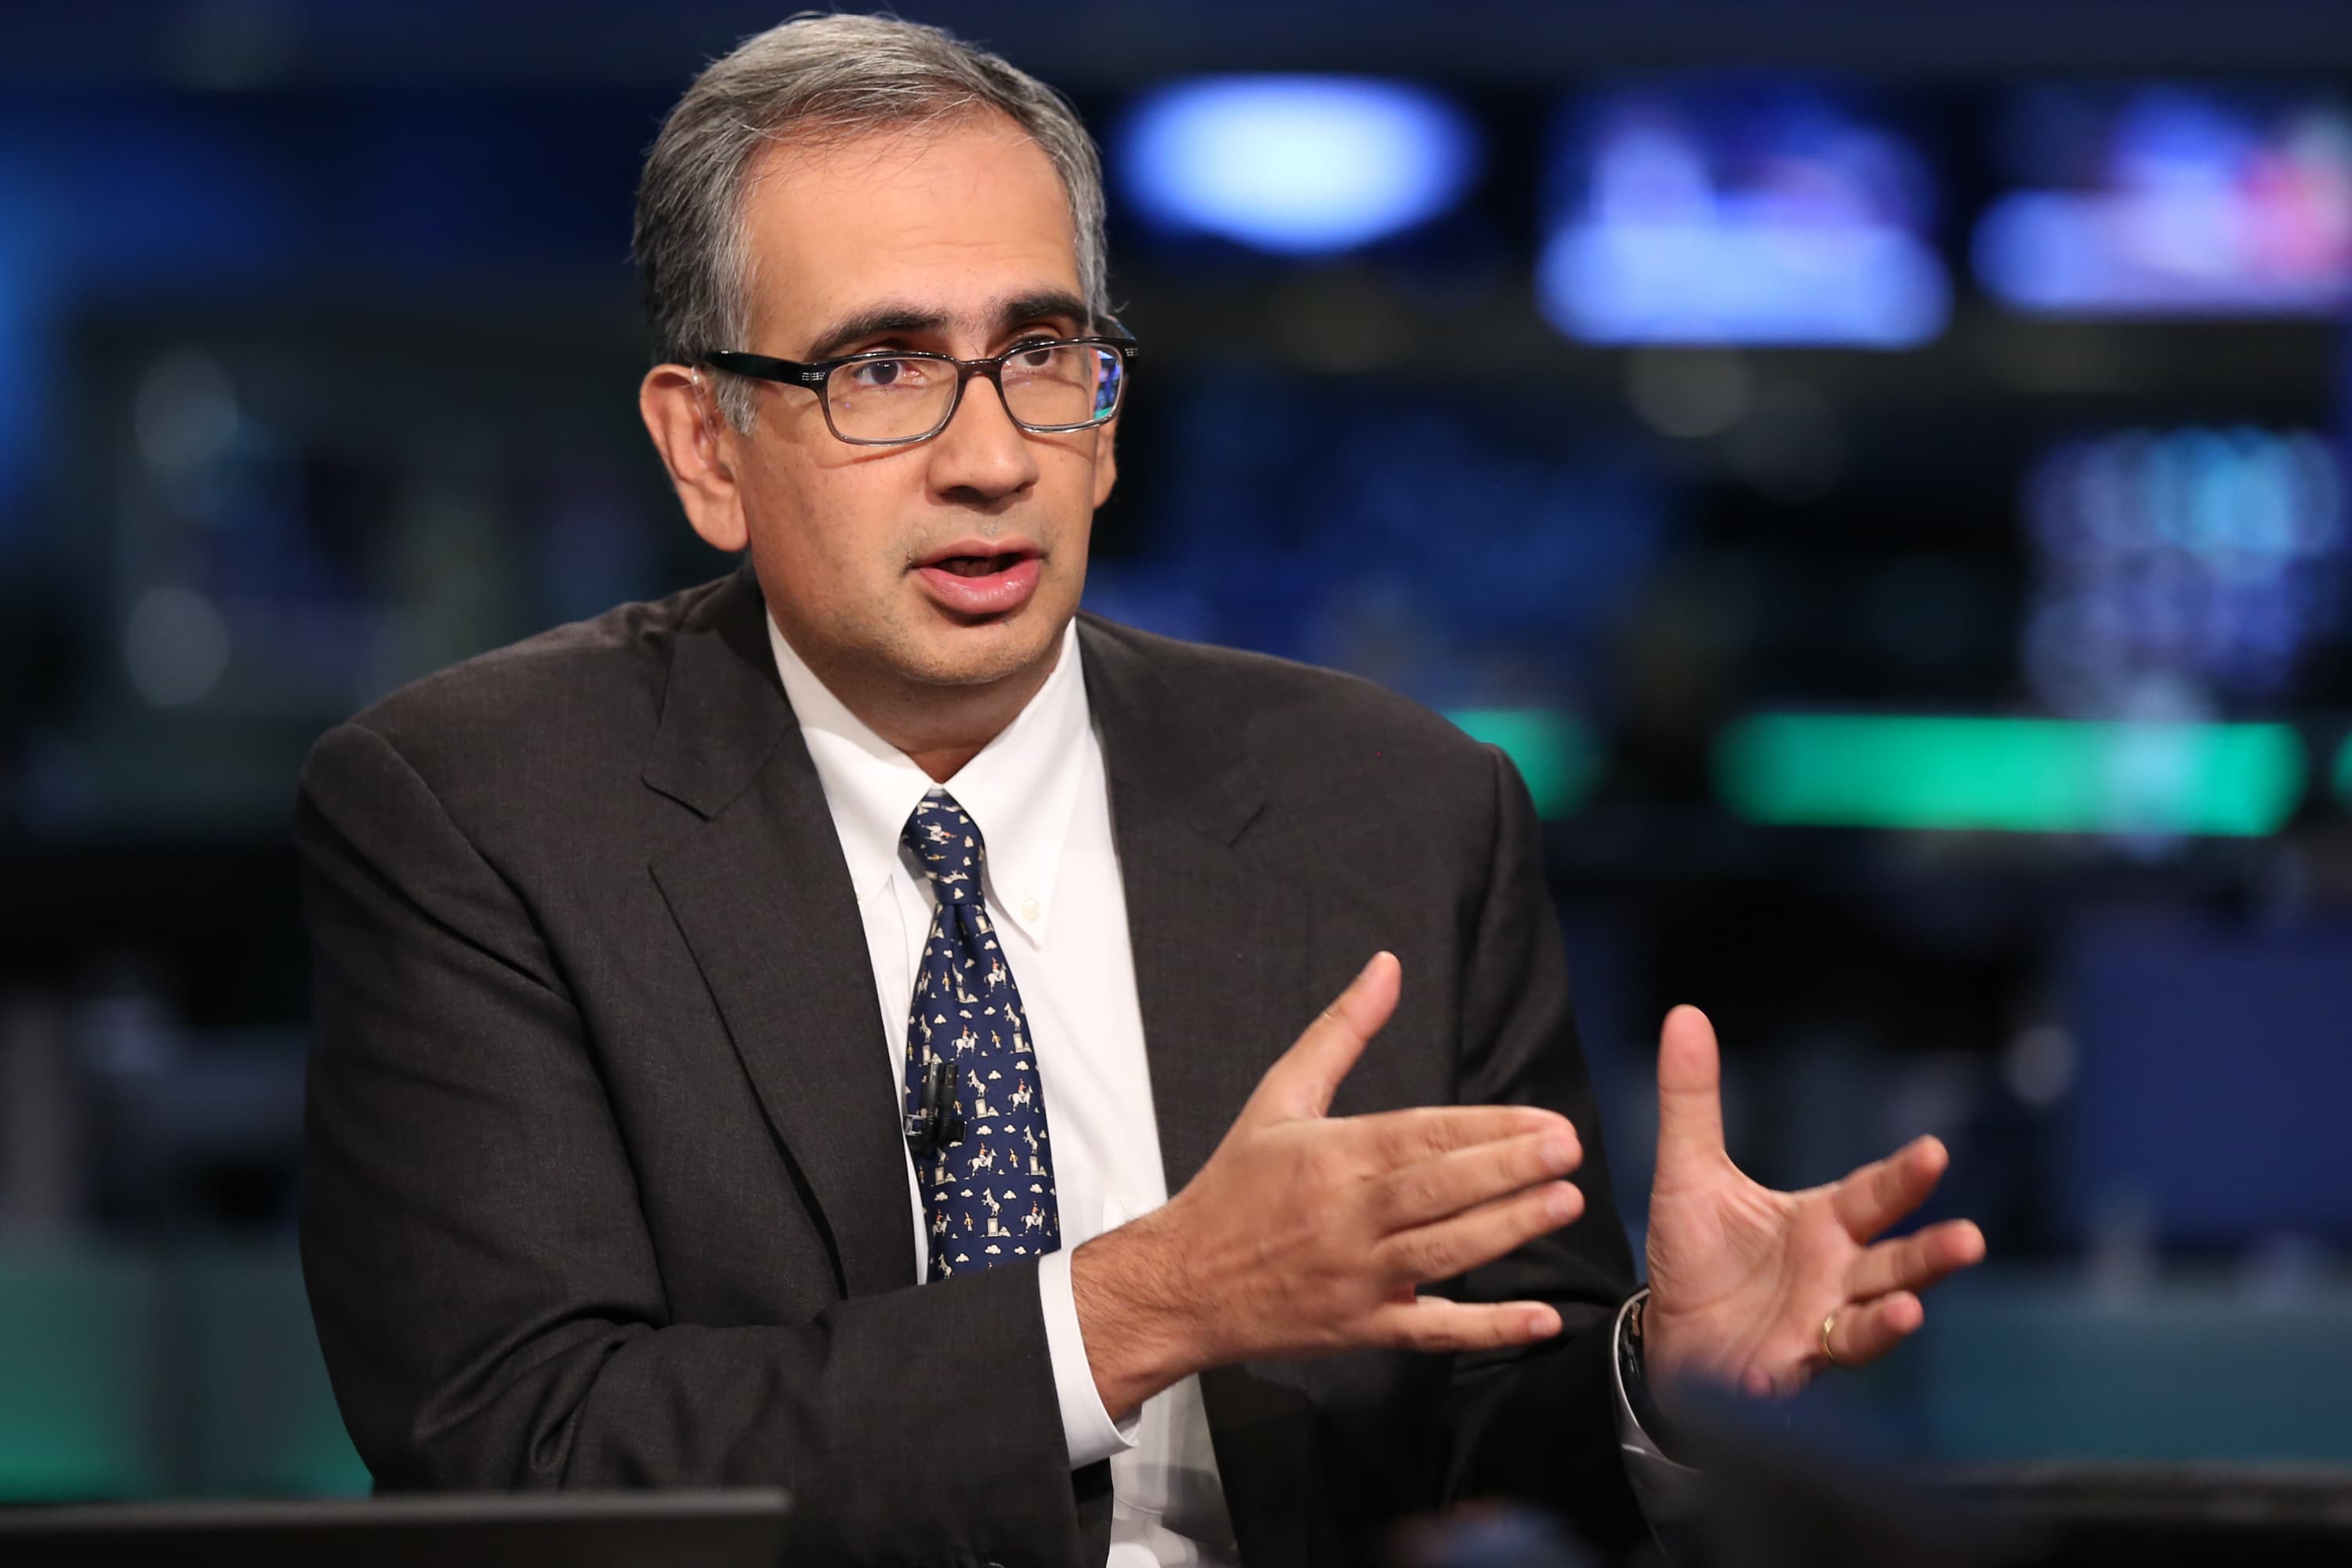 Here's why Sarat Sethi doesn't sell energy stocks even when oil prices fall